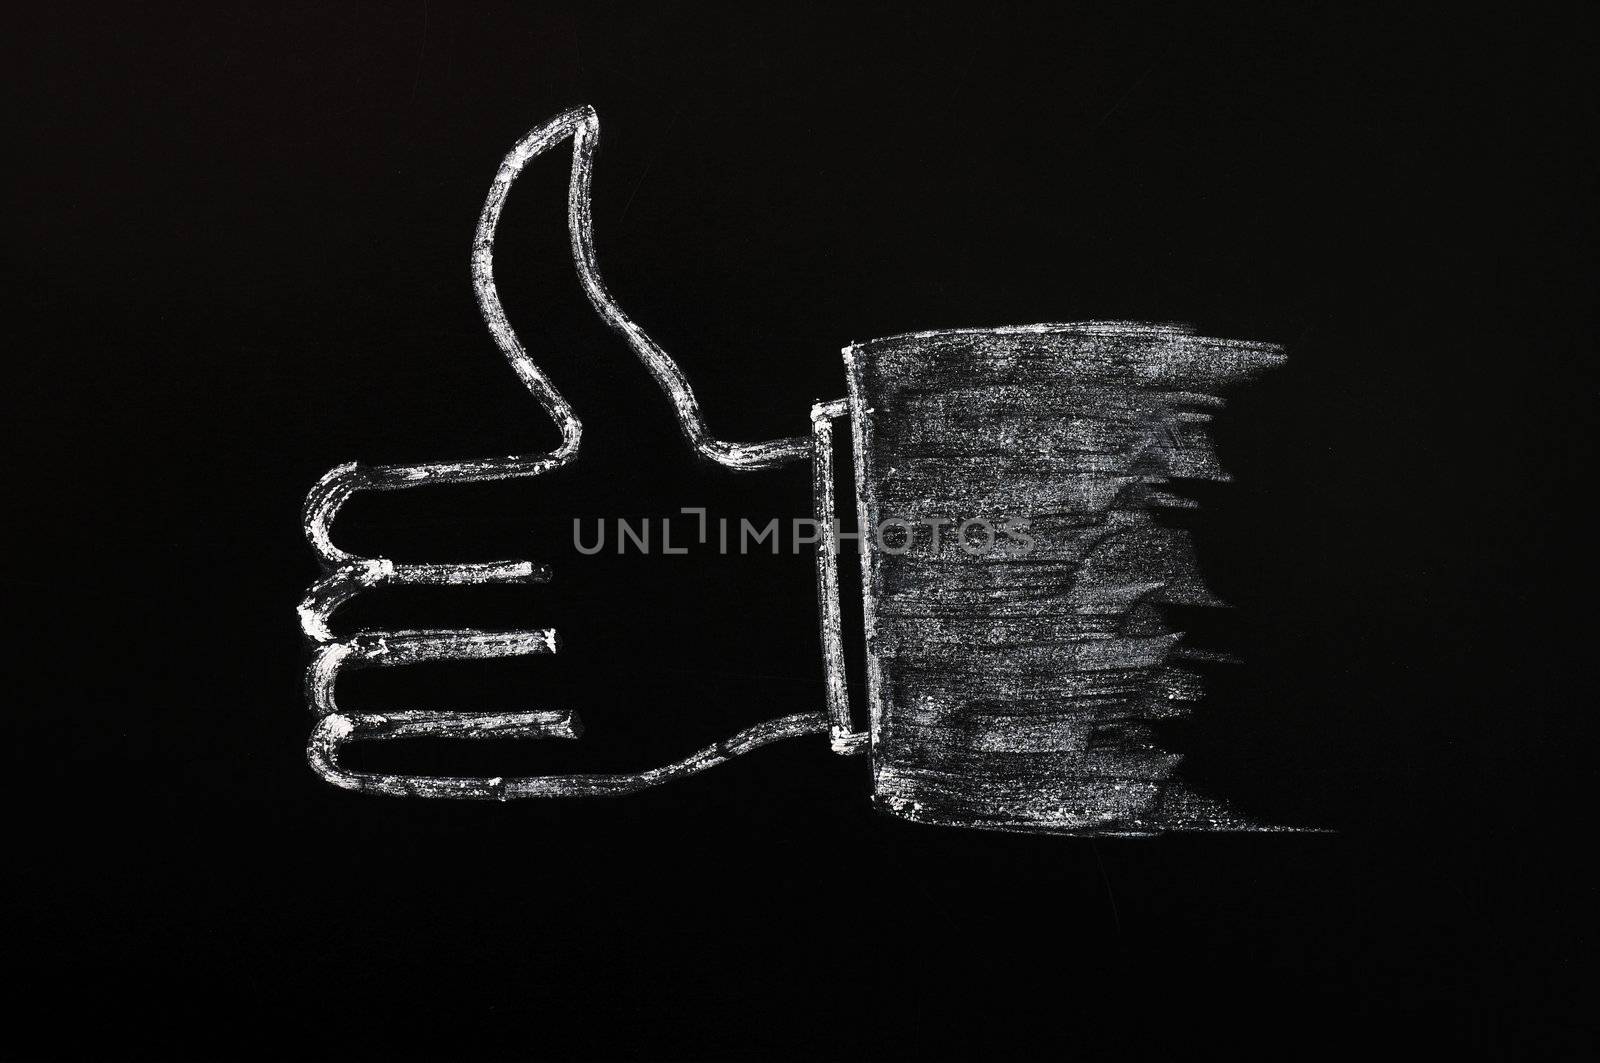 Chalk drawing of thumb up sign on blackboard background by bbbar